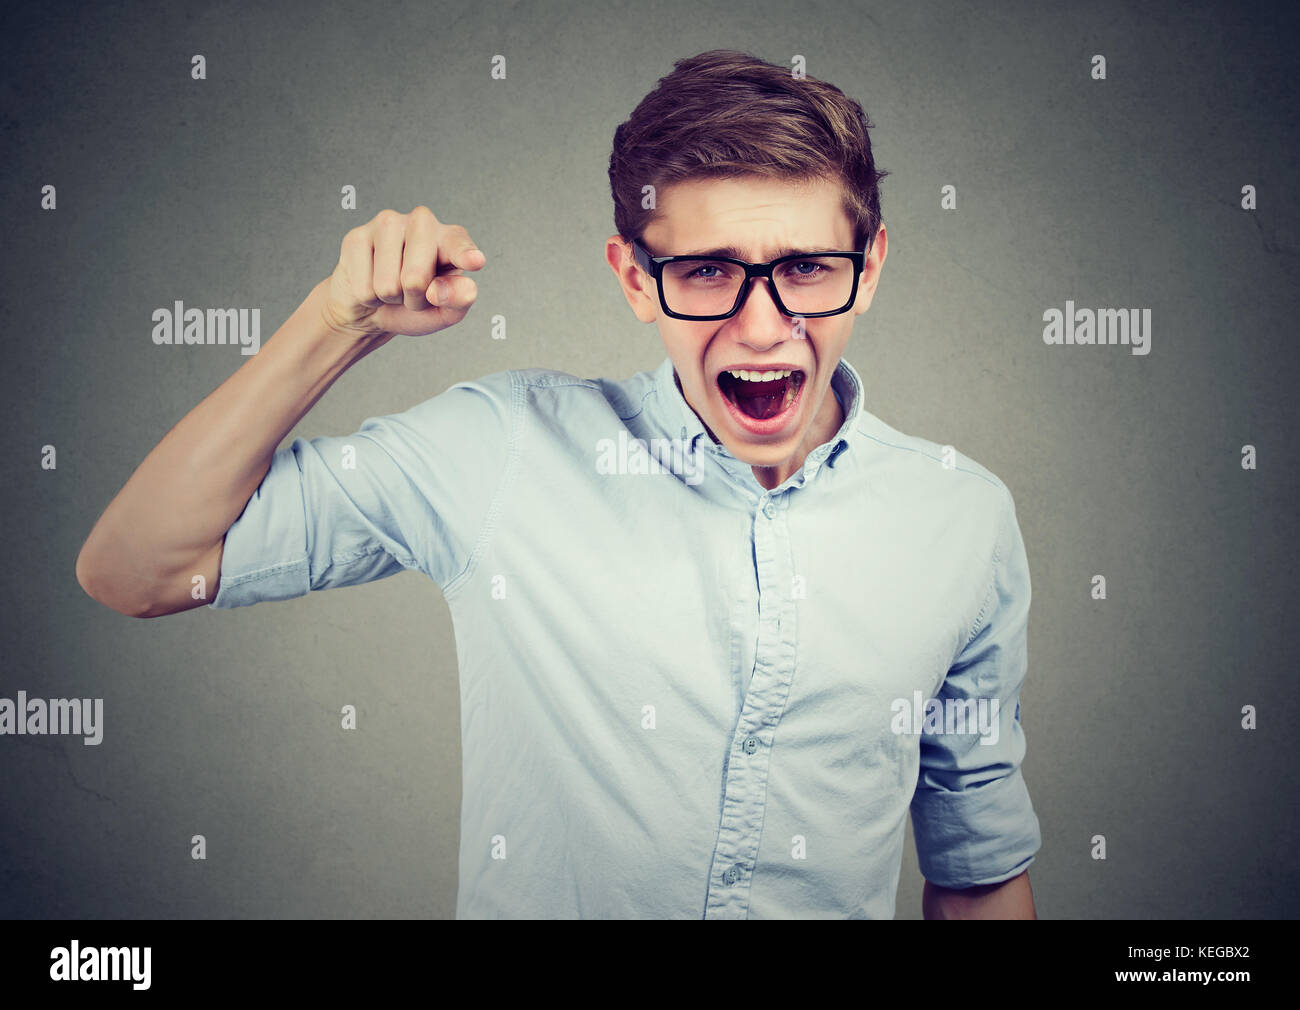 Angry teenager man accusing someone screaming pointing finger at camera Stock Photo